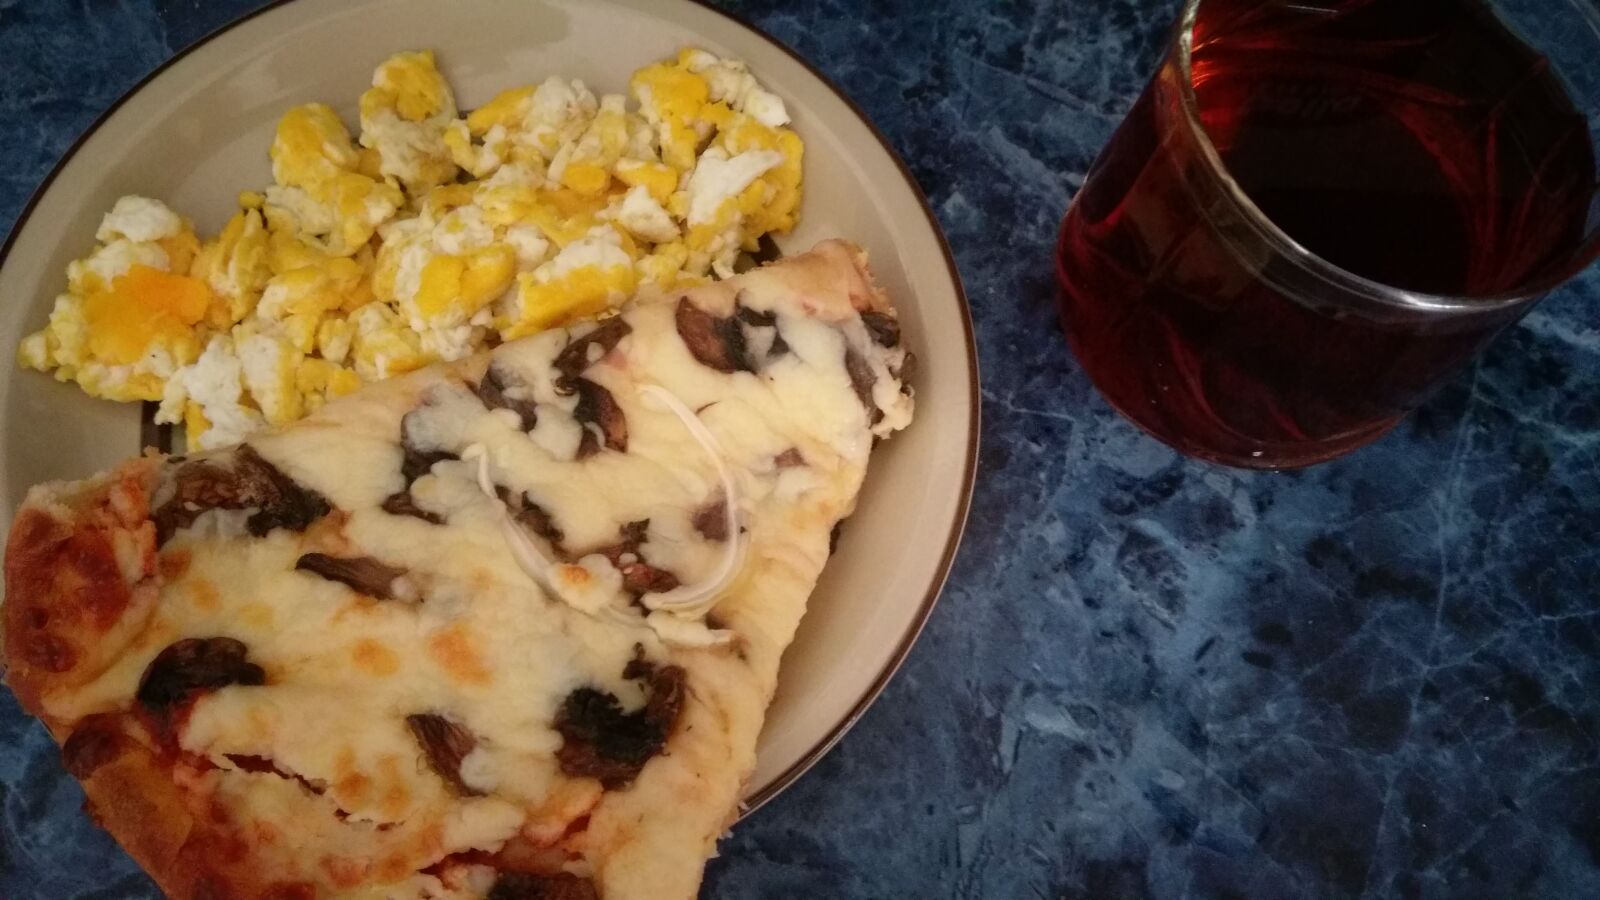 HTC ONE A9 sample photo. Breakfast, eggs, leftovers, pizza photography